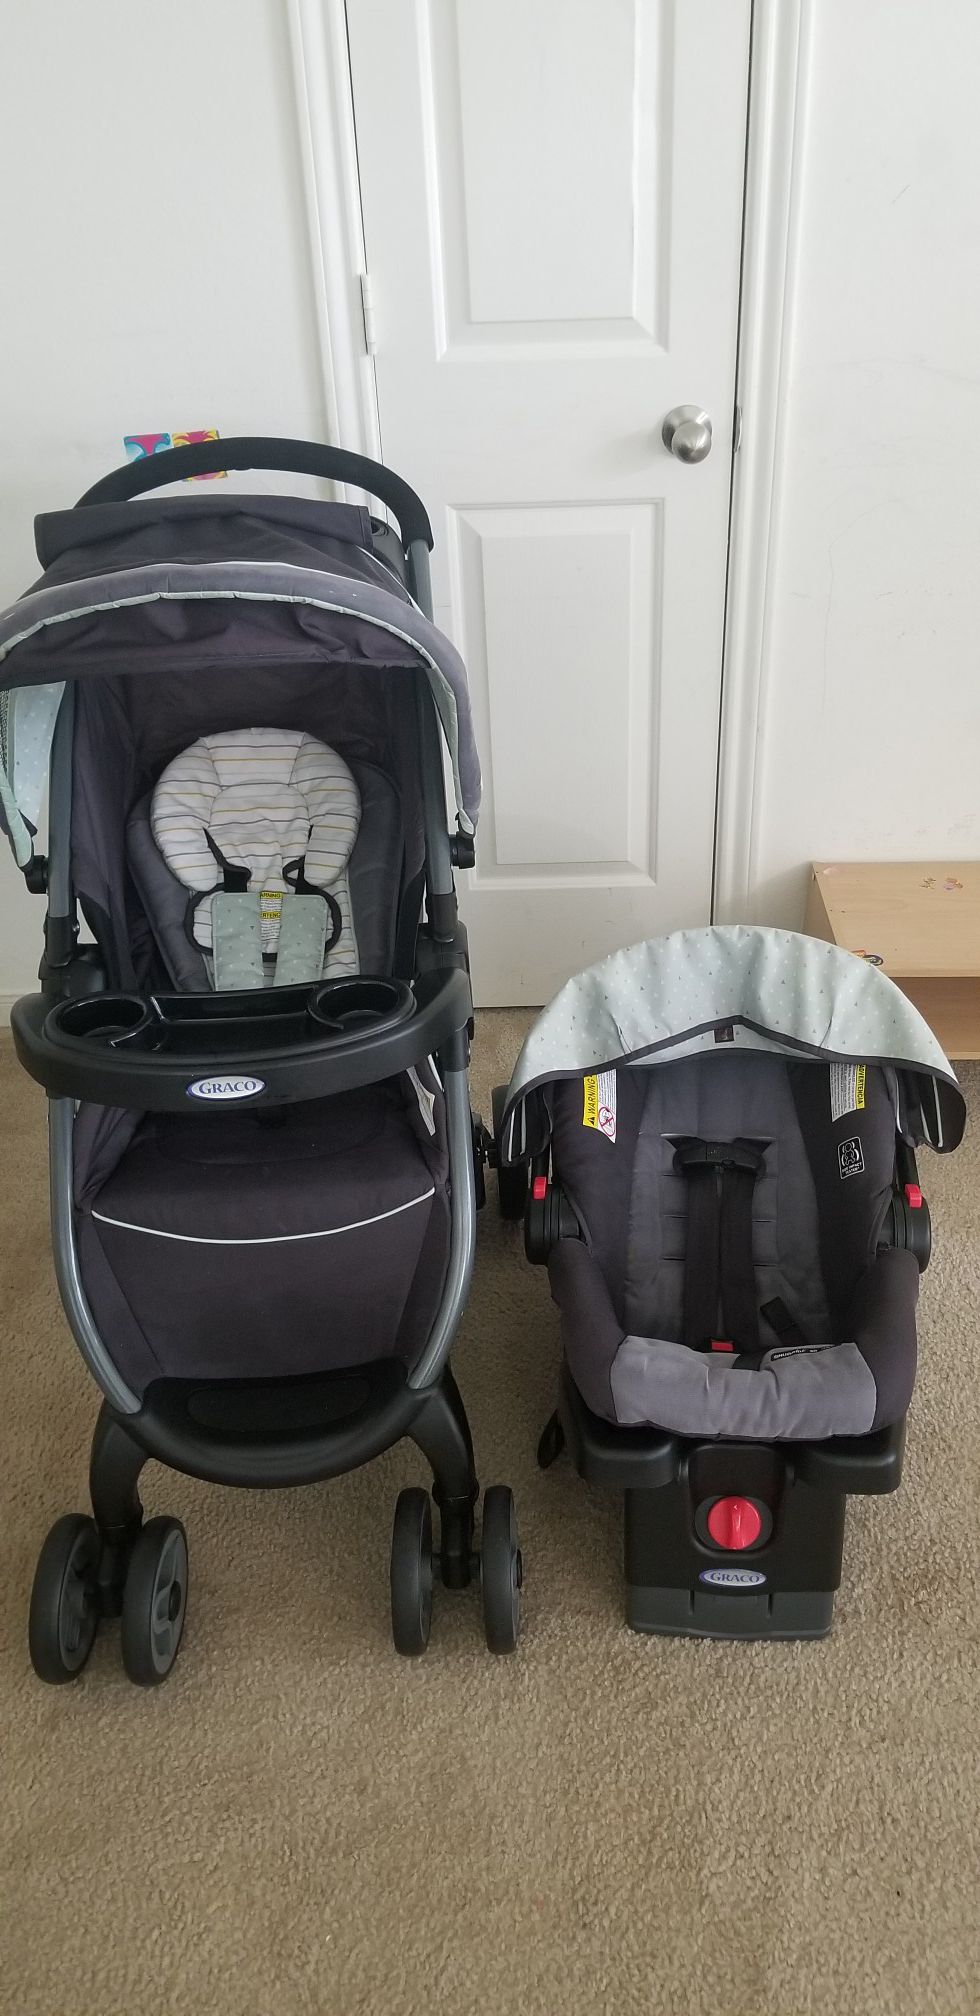 Graco foldable stroller and car seat